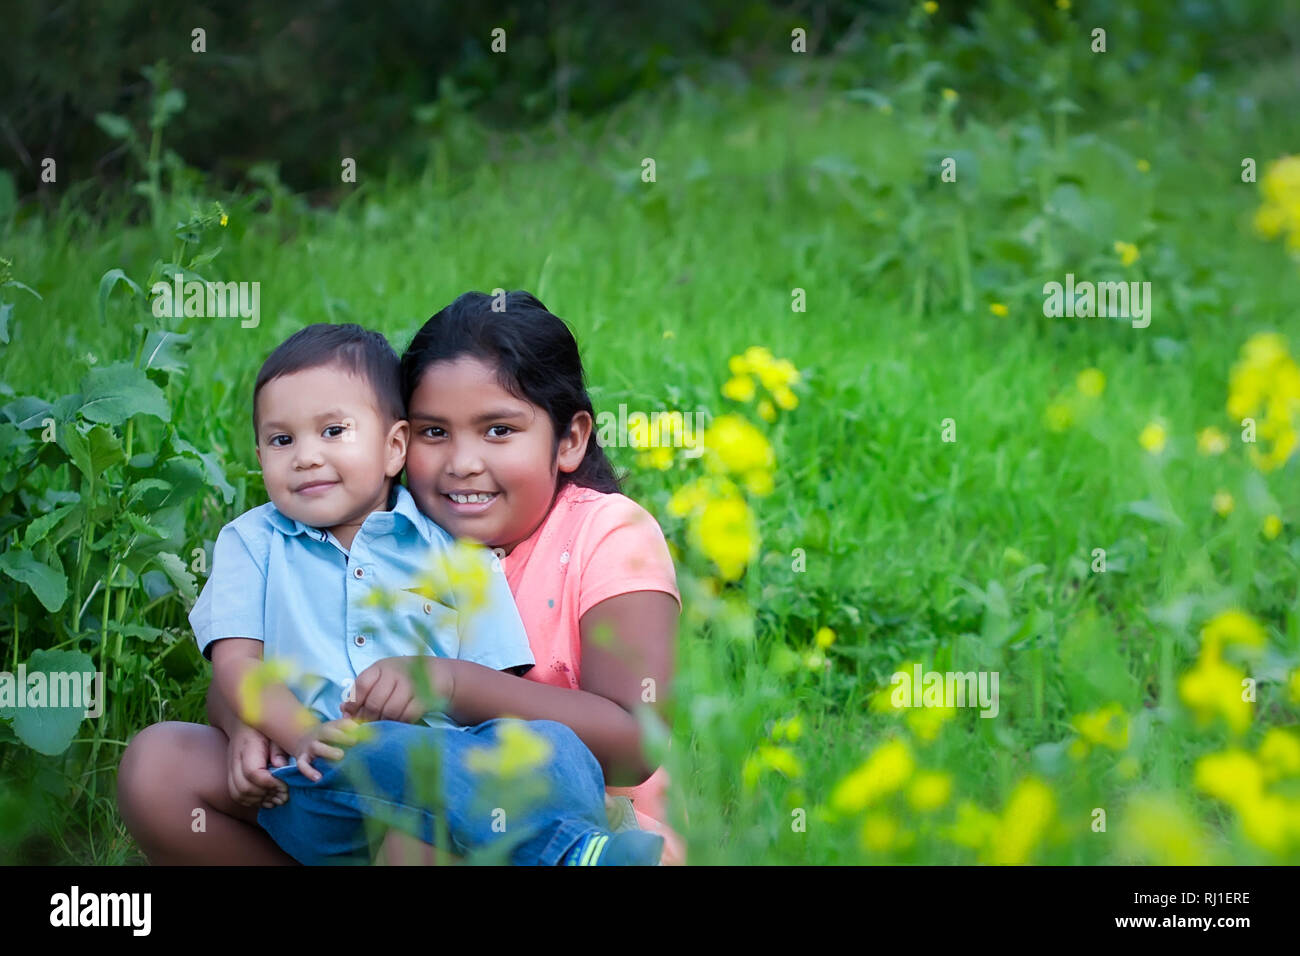 A little brother being held by his big sister, sitting together in a green field during spring. Stock Photo